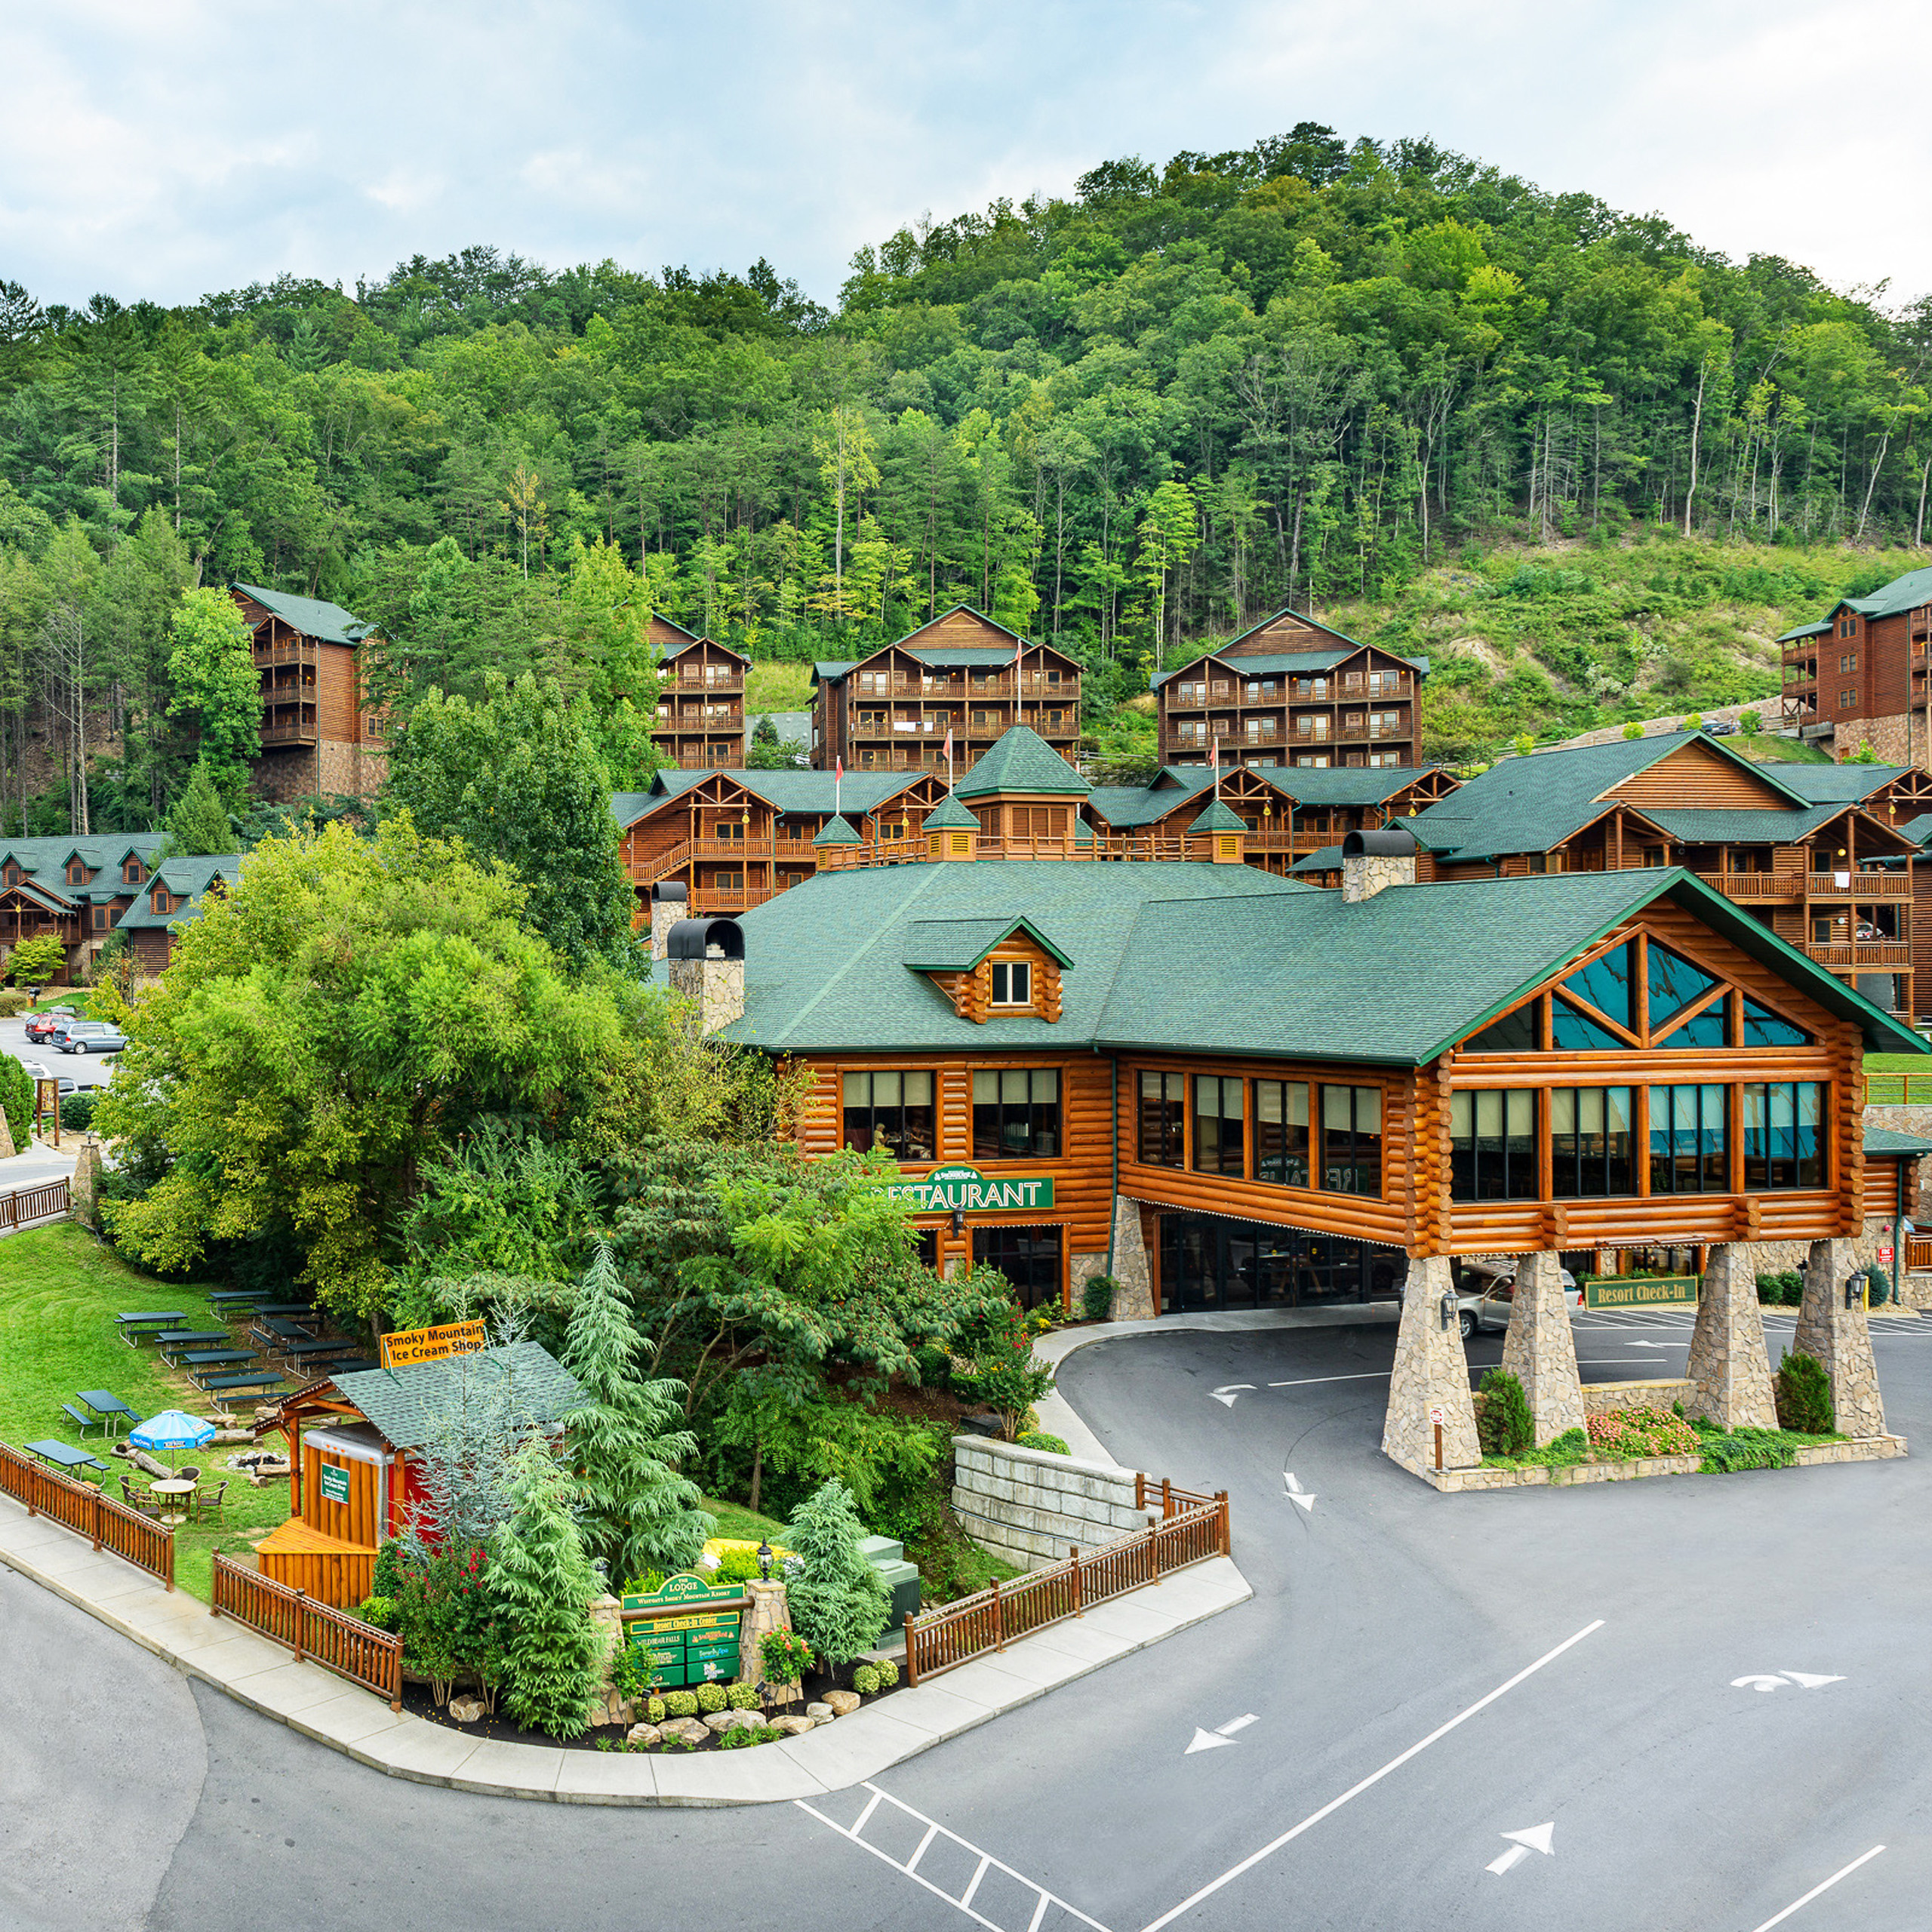 Dreaming of a great Smoky Mountain Vacation? Now you can daydream on digital! Download Your Favorite Westgate Smoky Mountain Wallpaper HERE!